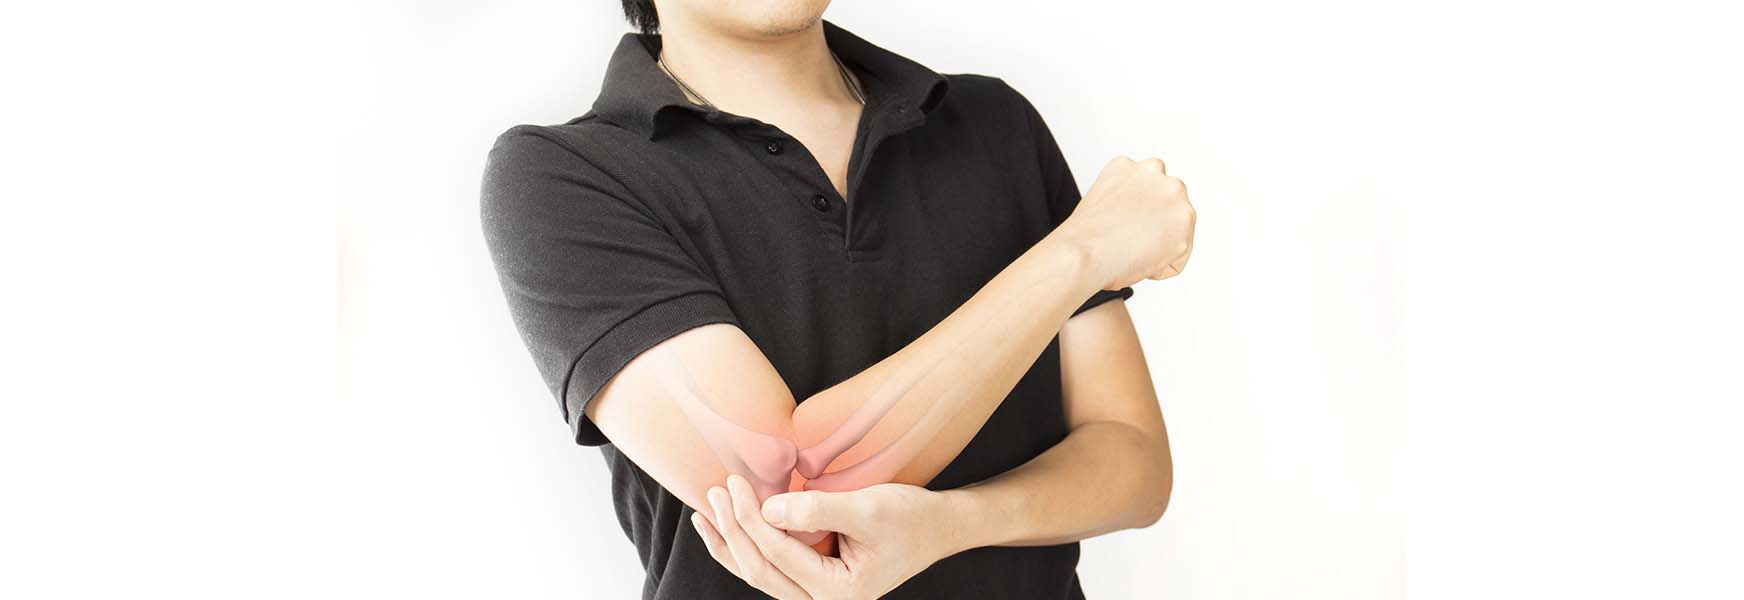 Person with tennis elbow pain